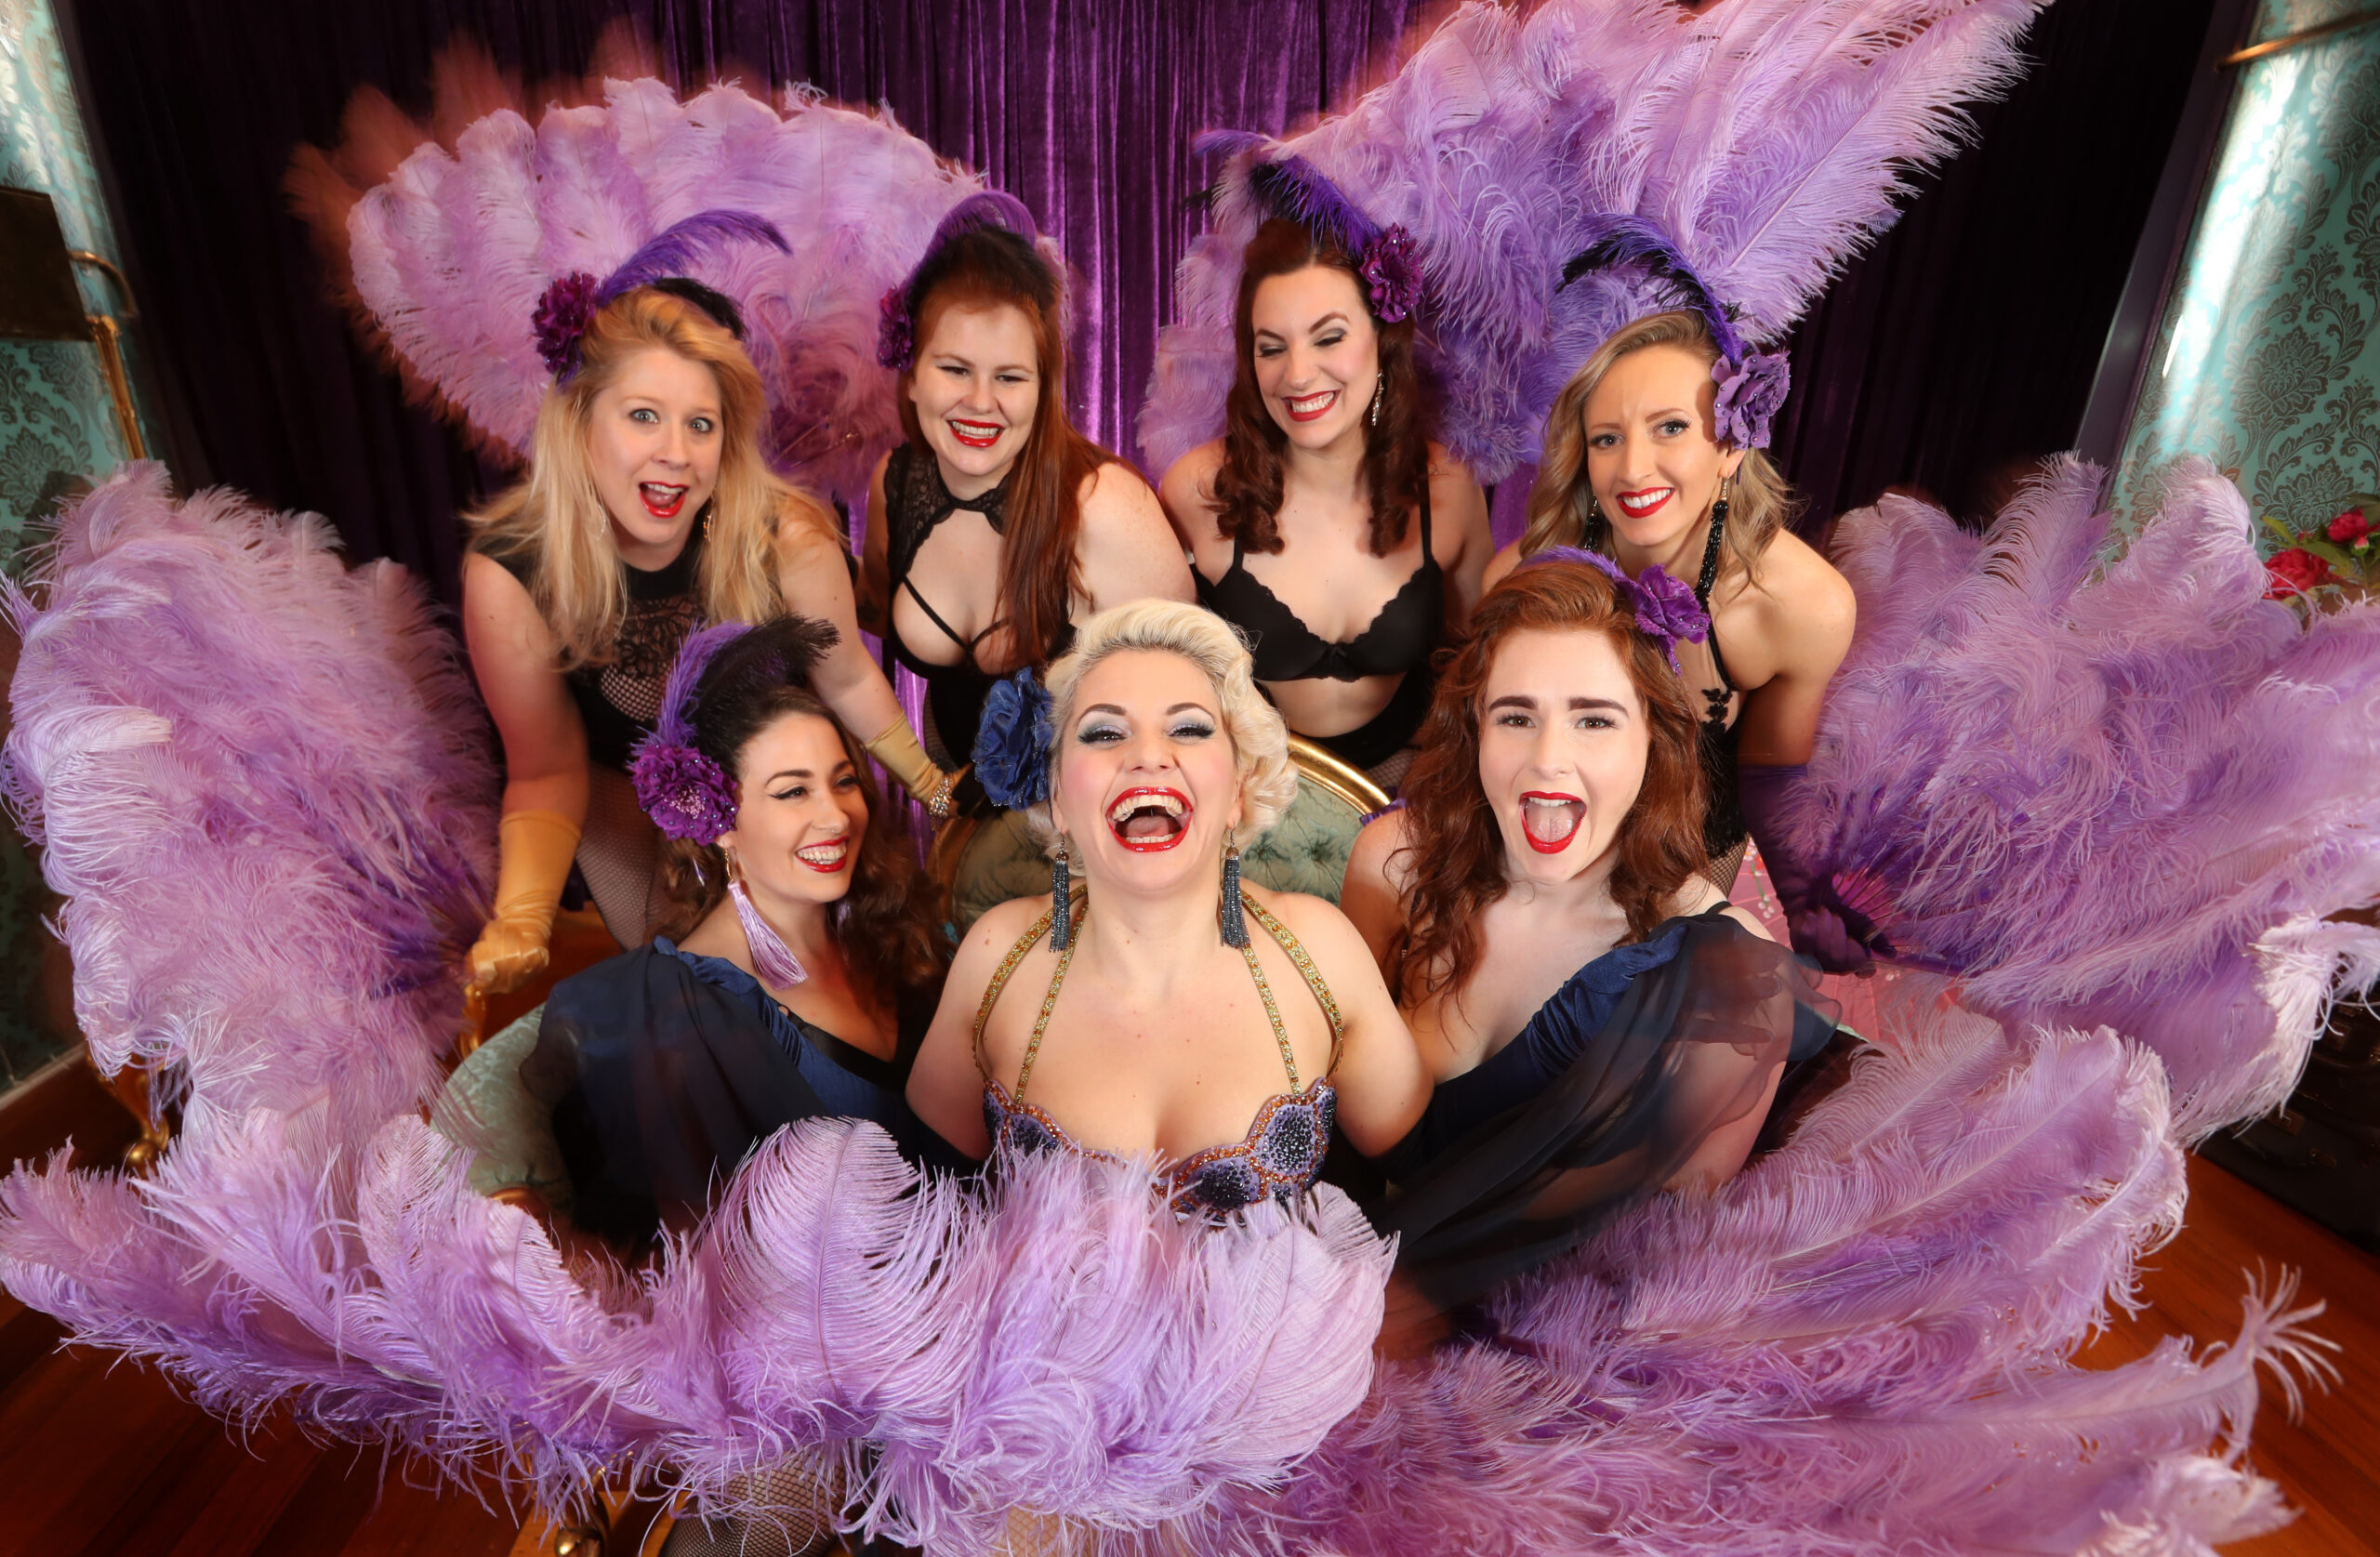 Seven femme-presenting dance3rs encapsulated in purple feather fans.